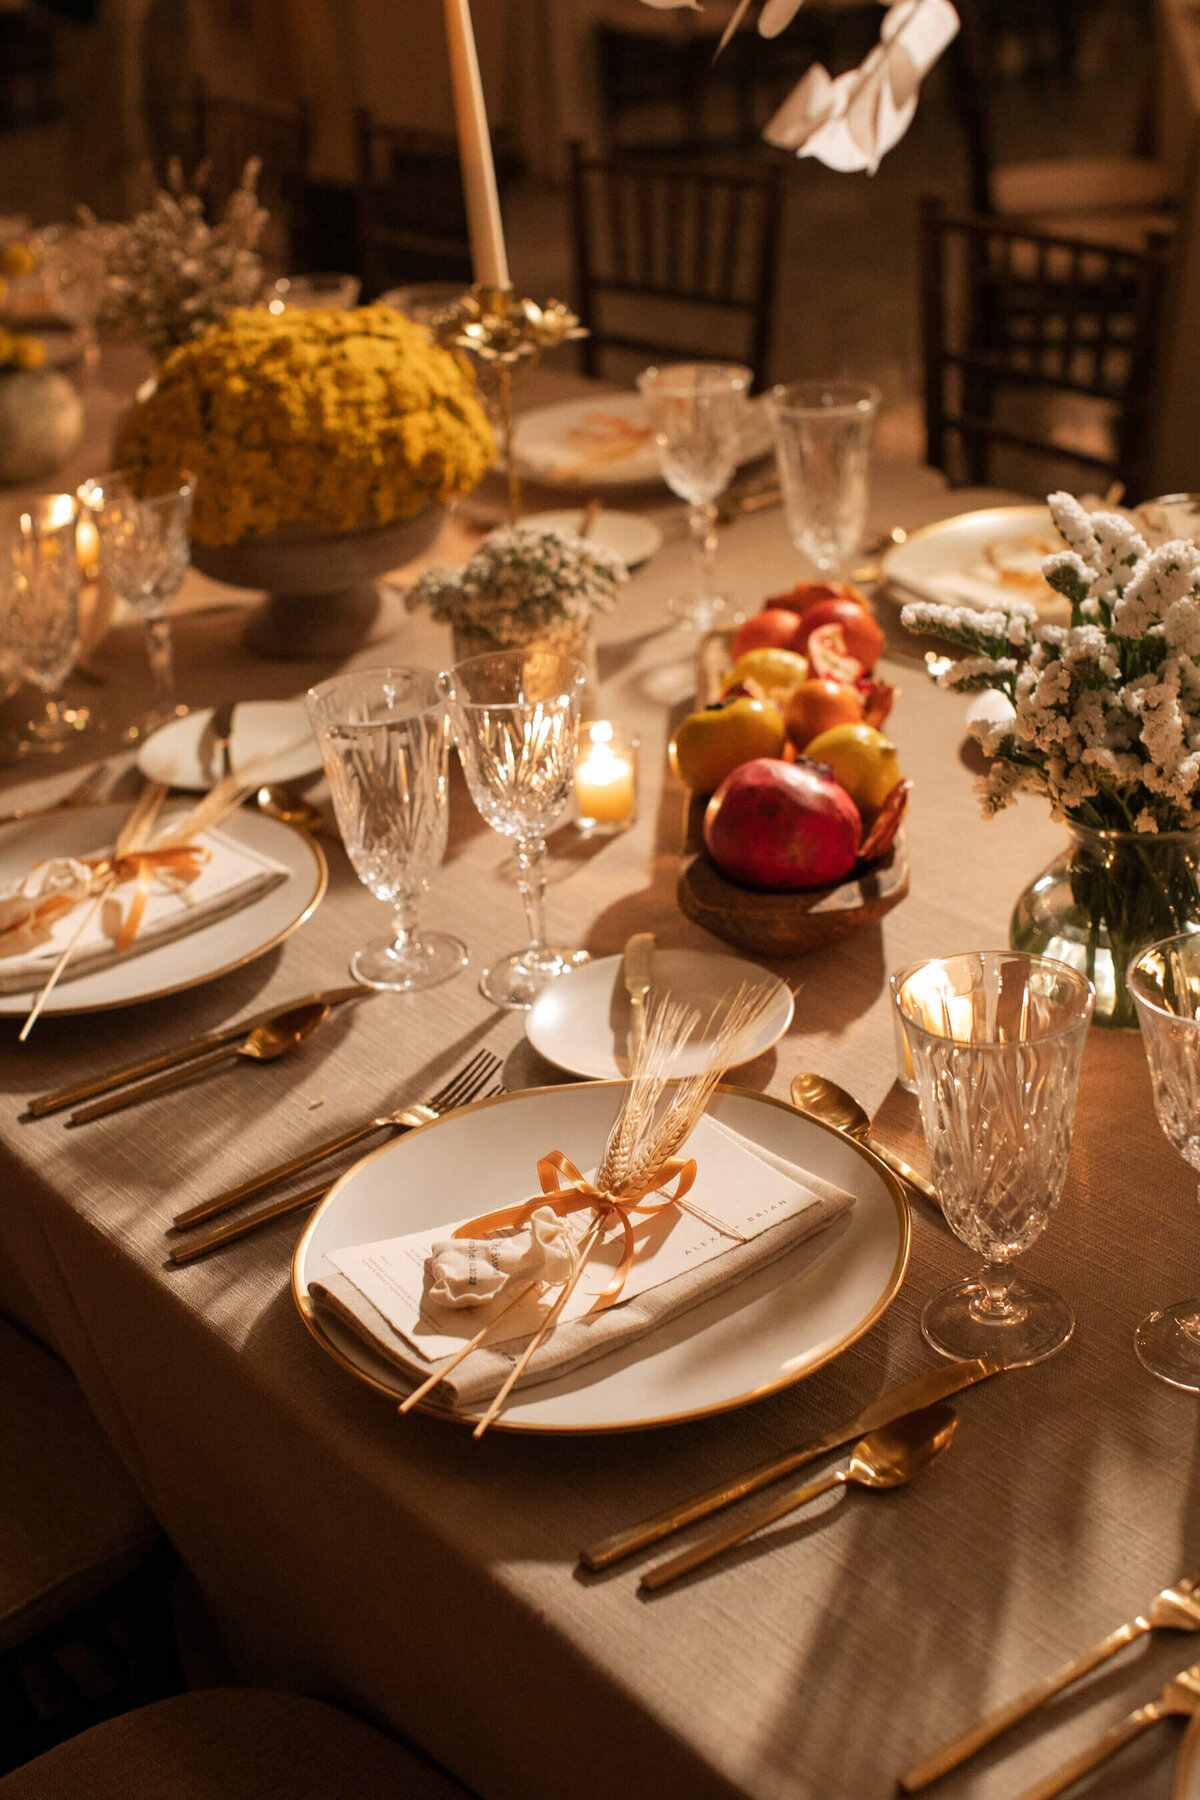 Gold flatware and stone plates with cut crystal wine glasses.